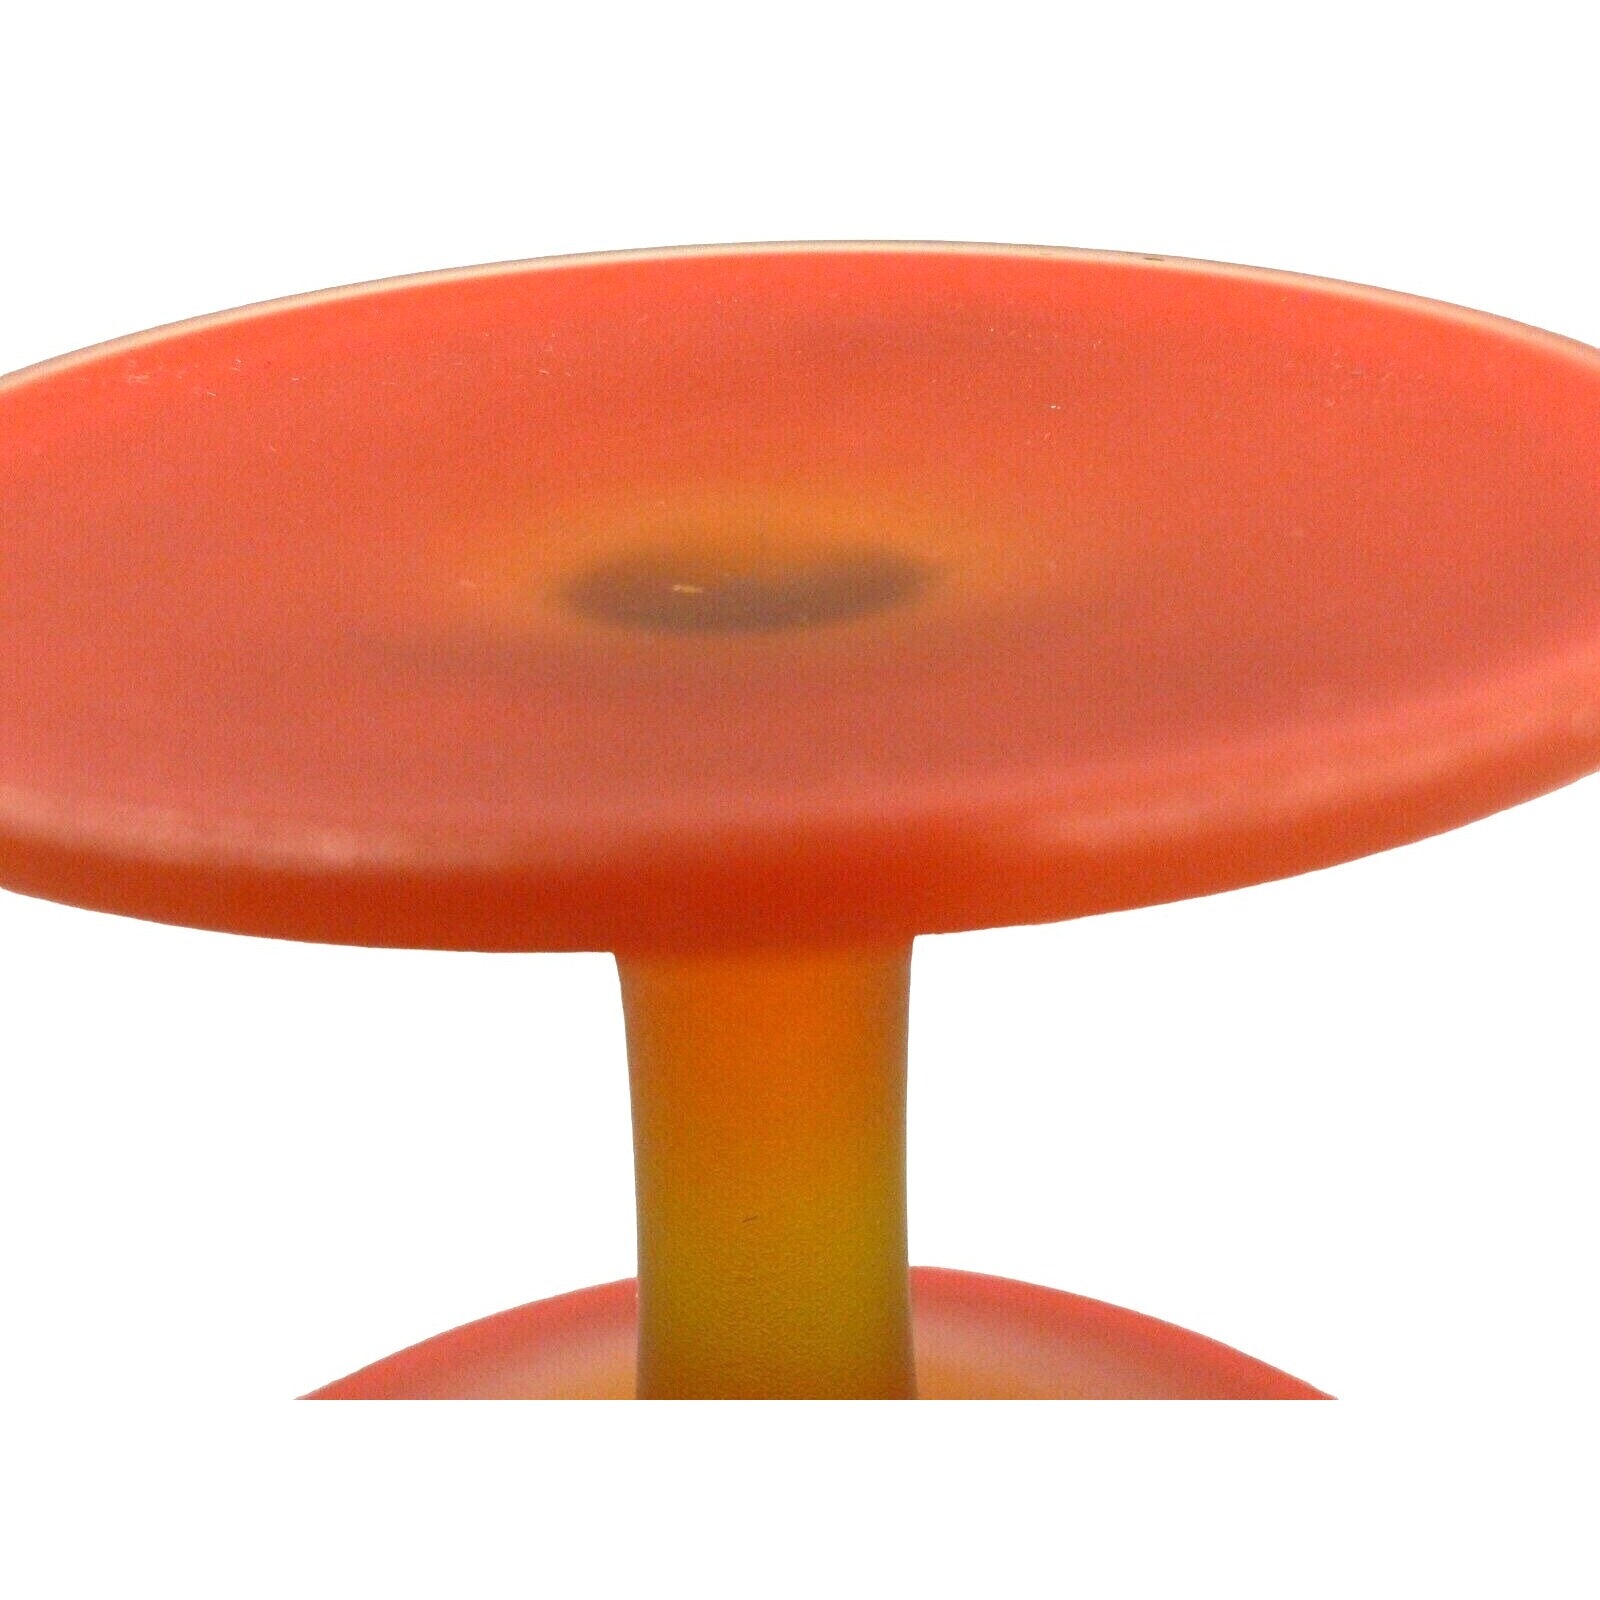 Dish Candy Nut Compote Retro Pedestal Style Matte Finish